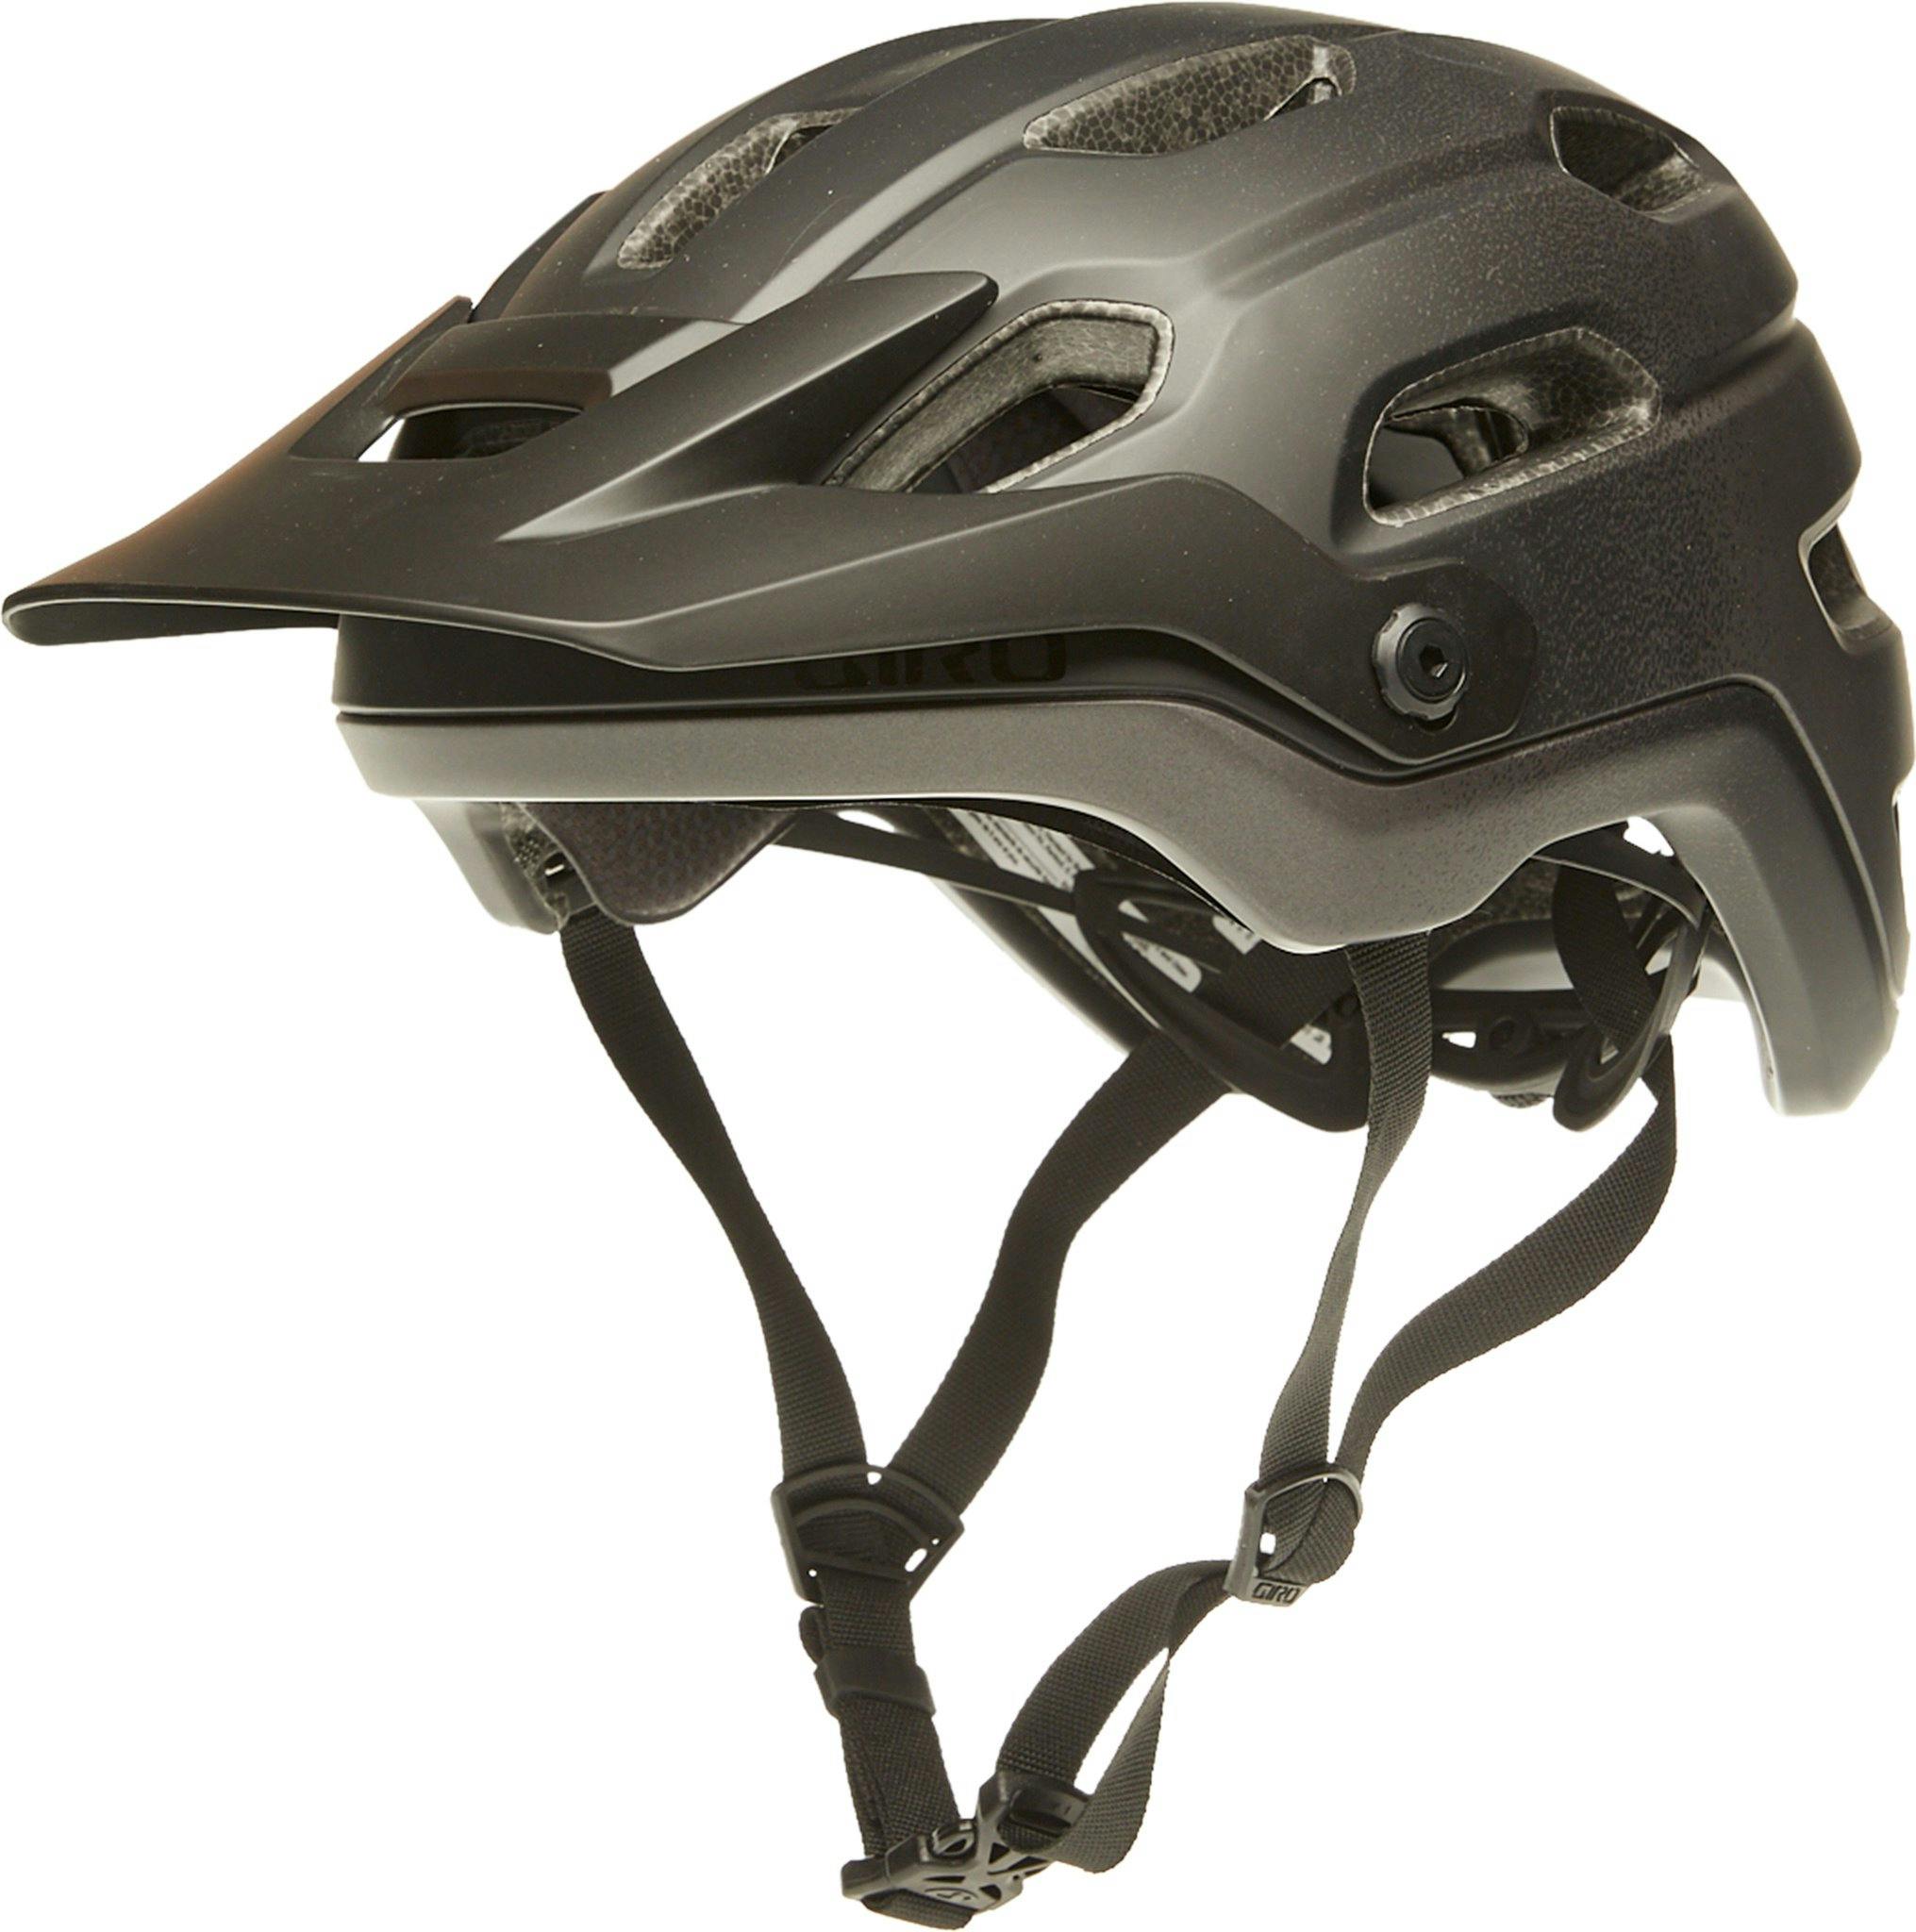 Product image for Source MIPS Helmet - Unisex